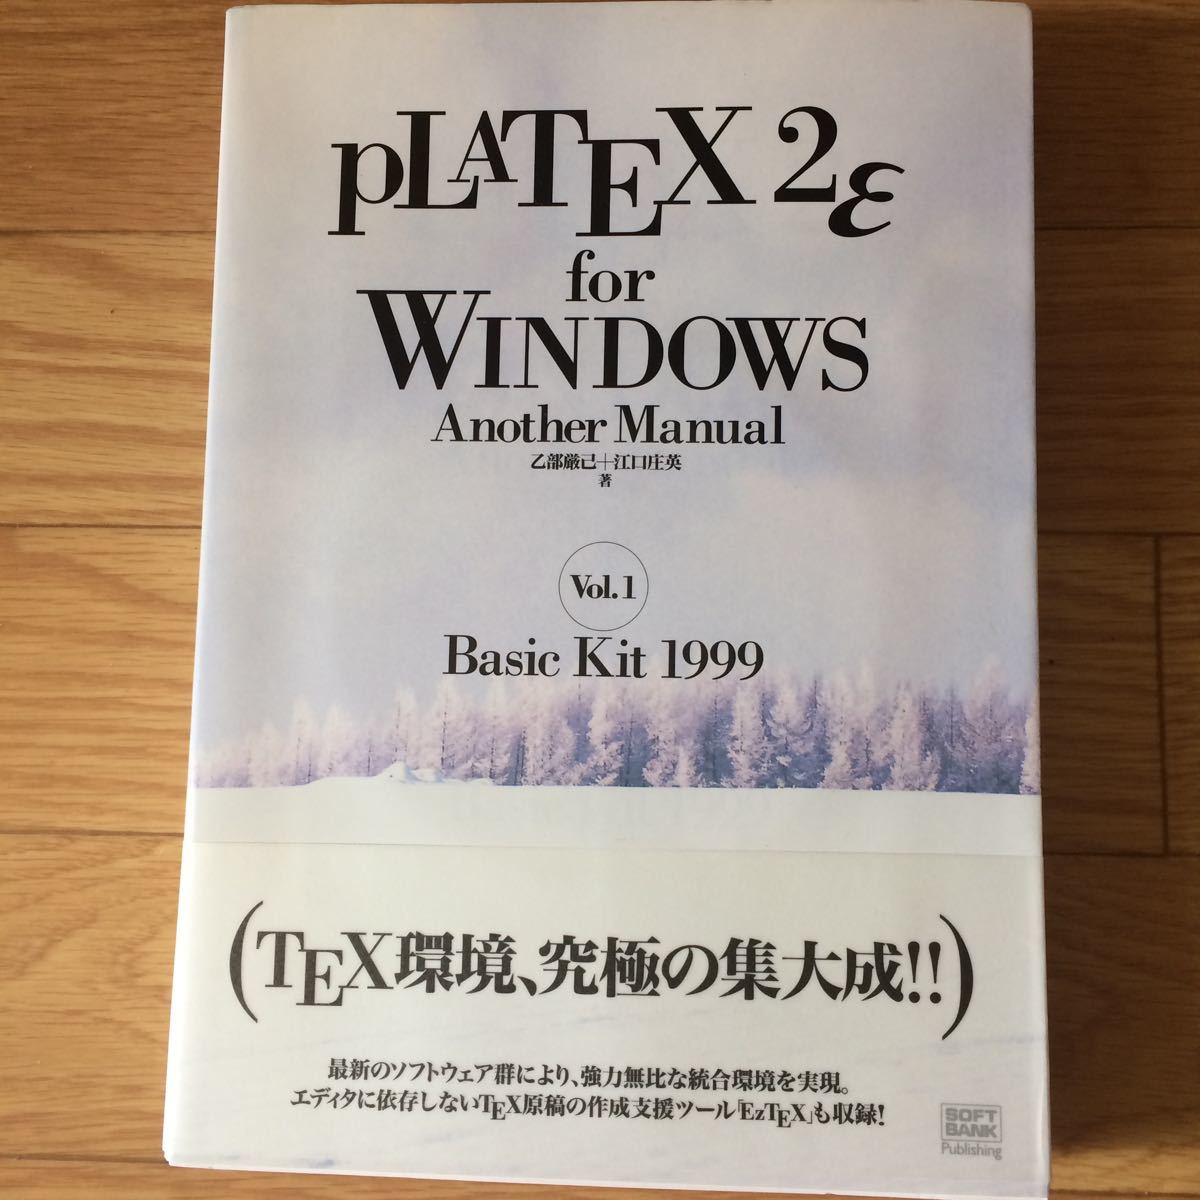 PLATEX 2ε for Windows Another Manual(Vol.1)Basic Kit 1999 the first version no. 4.. part ..,... britain work 